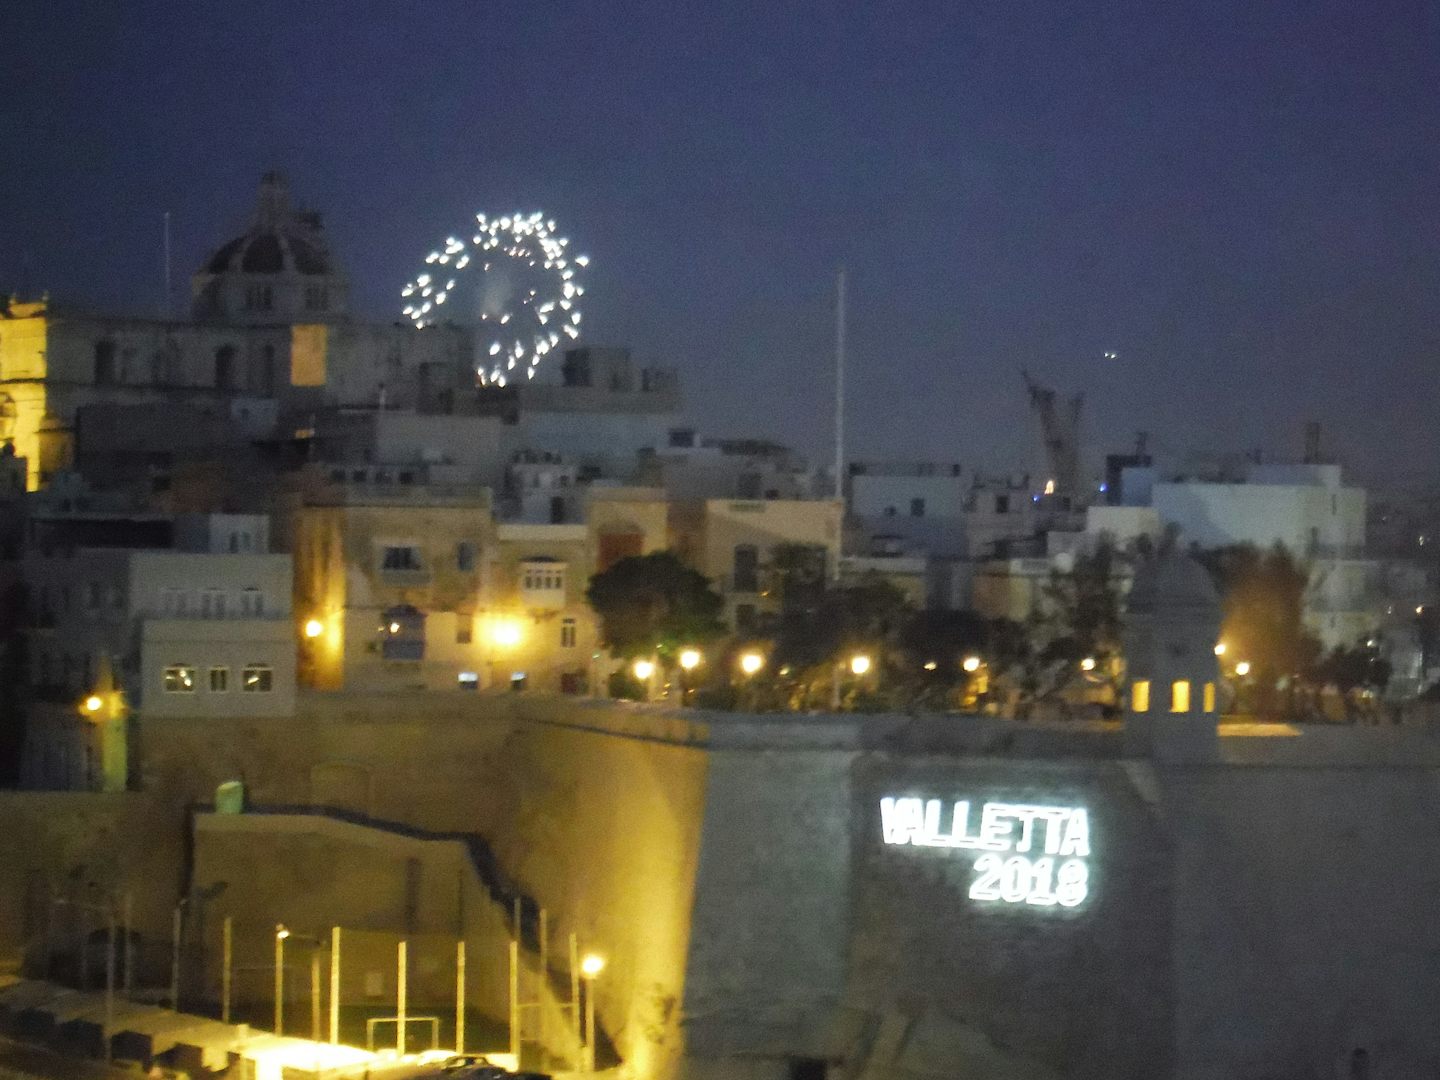 Valletta, Malta evening sail-away. Fireworks seen from our balcony cabin #1